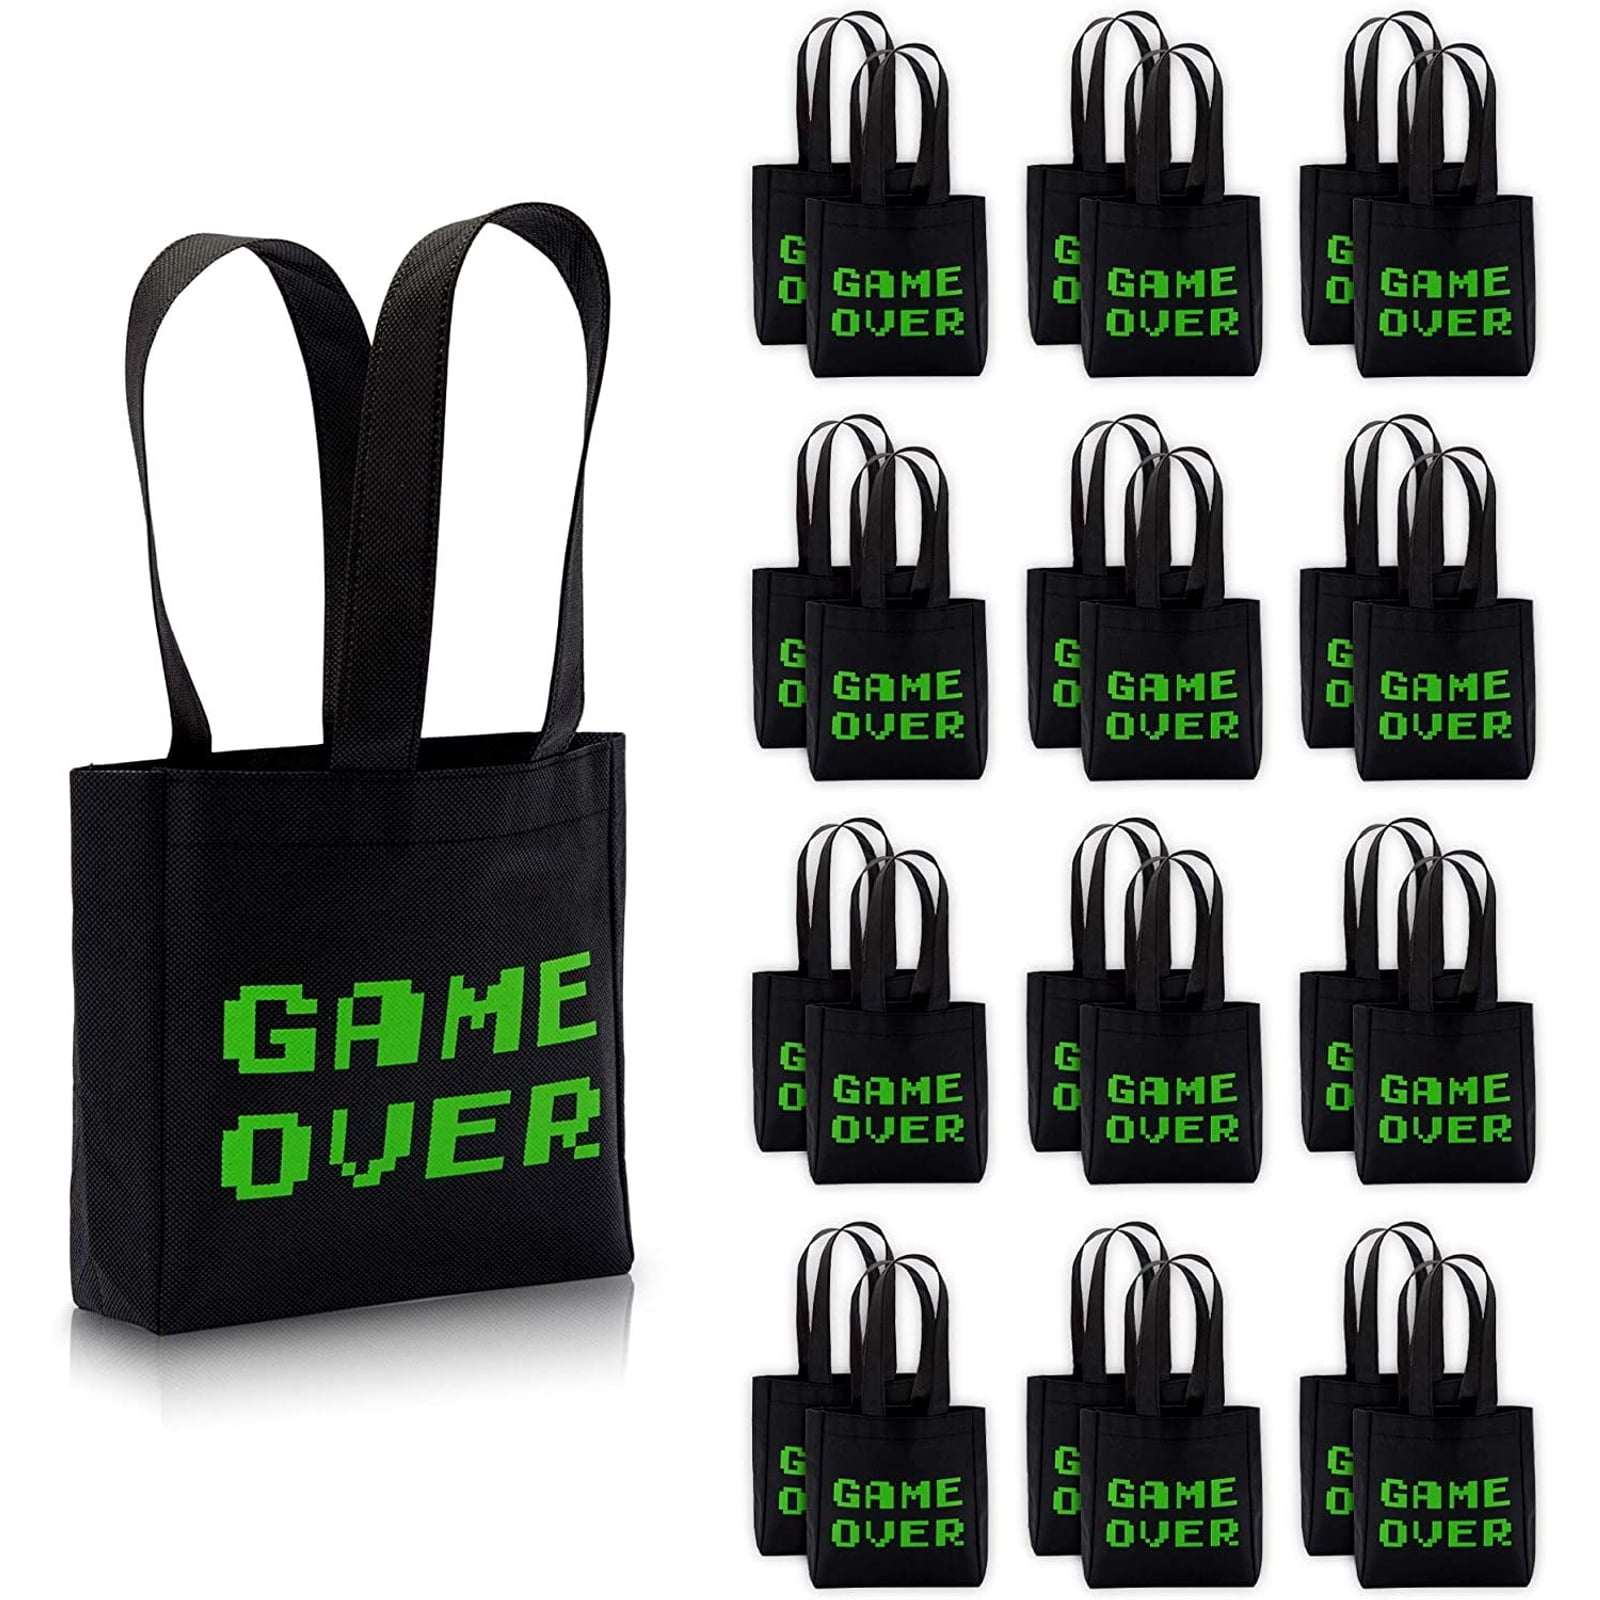 Golf Party Favors 24 Pack Golf Goodie Bags with Thank You Kraft Tags and White Gift Bags Decor for Teens Girls Boys Sports Birthday Party Gifts Golf